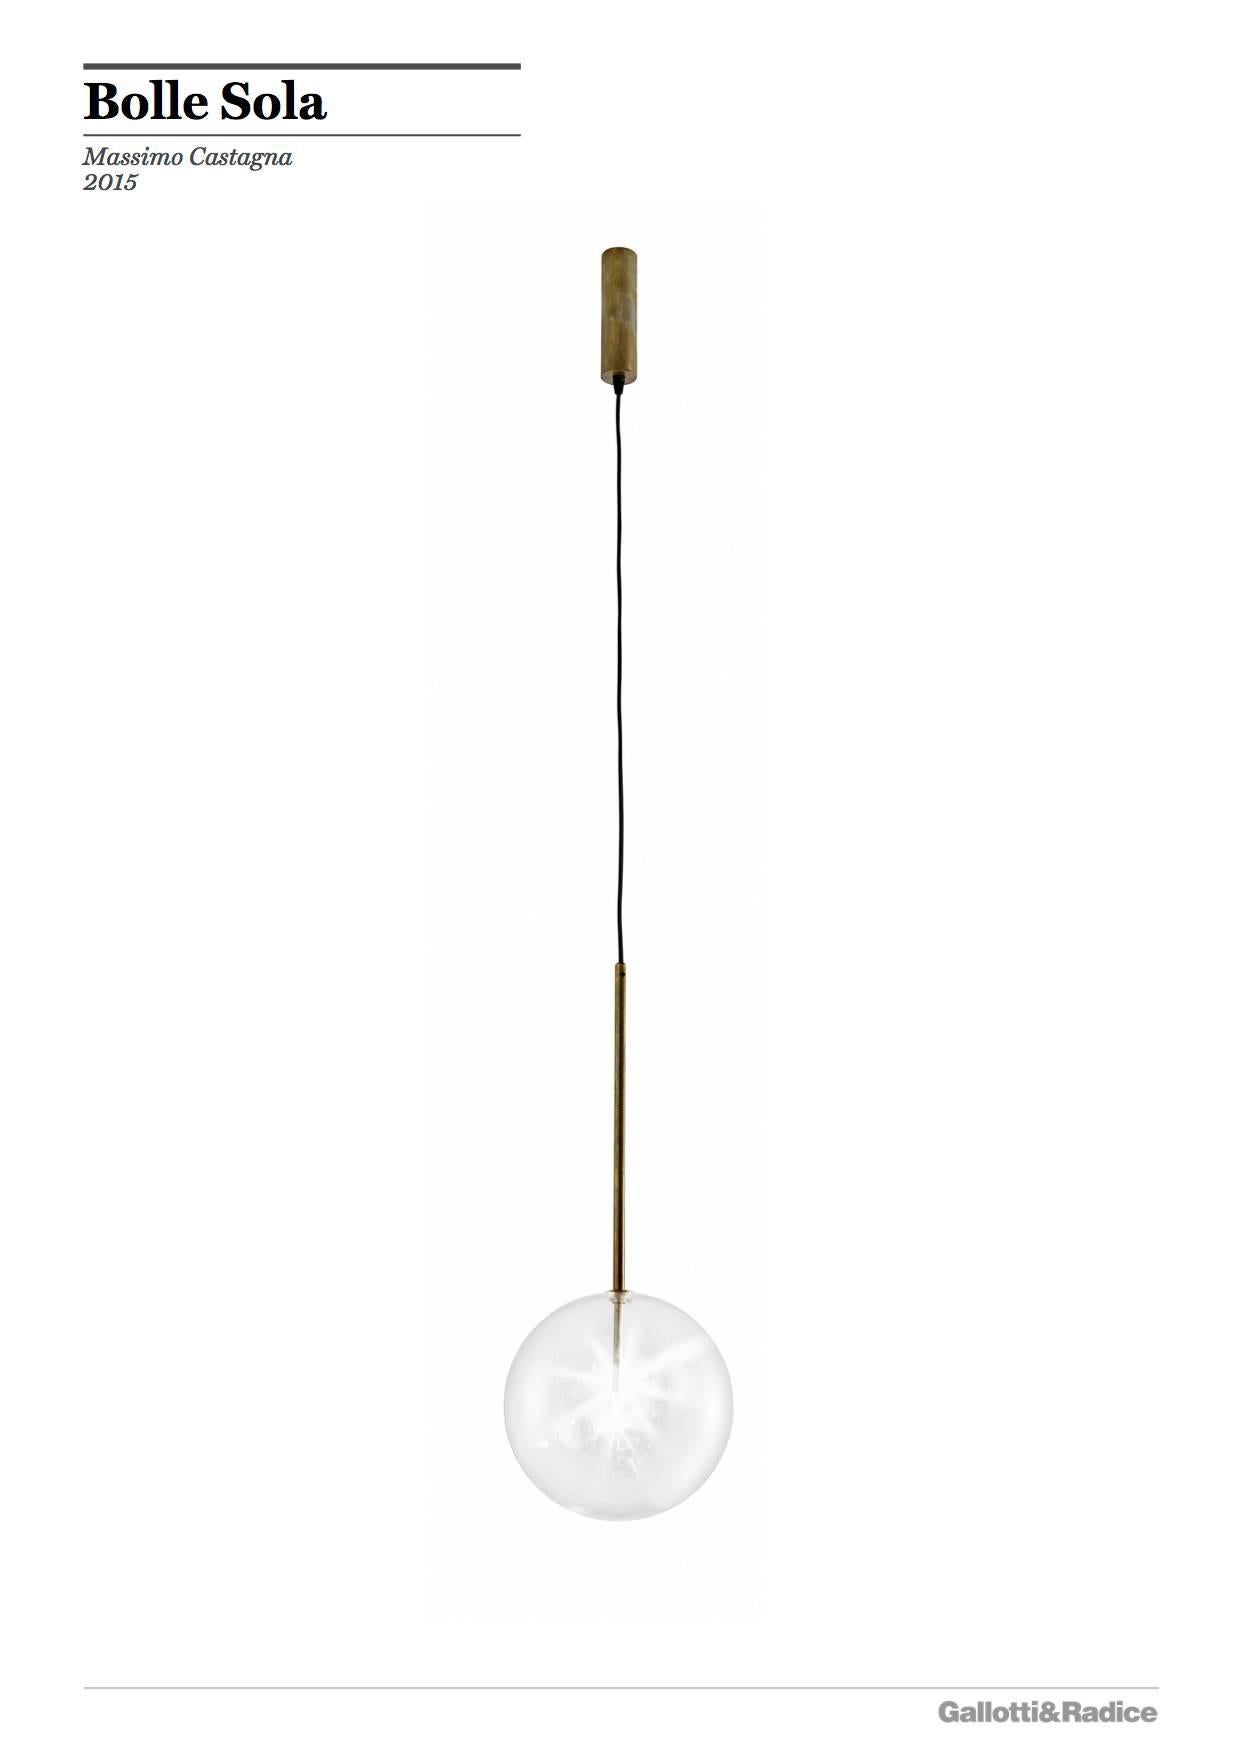 Modern Gallotti and Radice Bolle Sola Suspension Lamp in Hand Burnished Brass and Glass For Sale